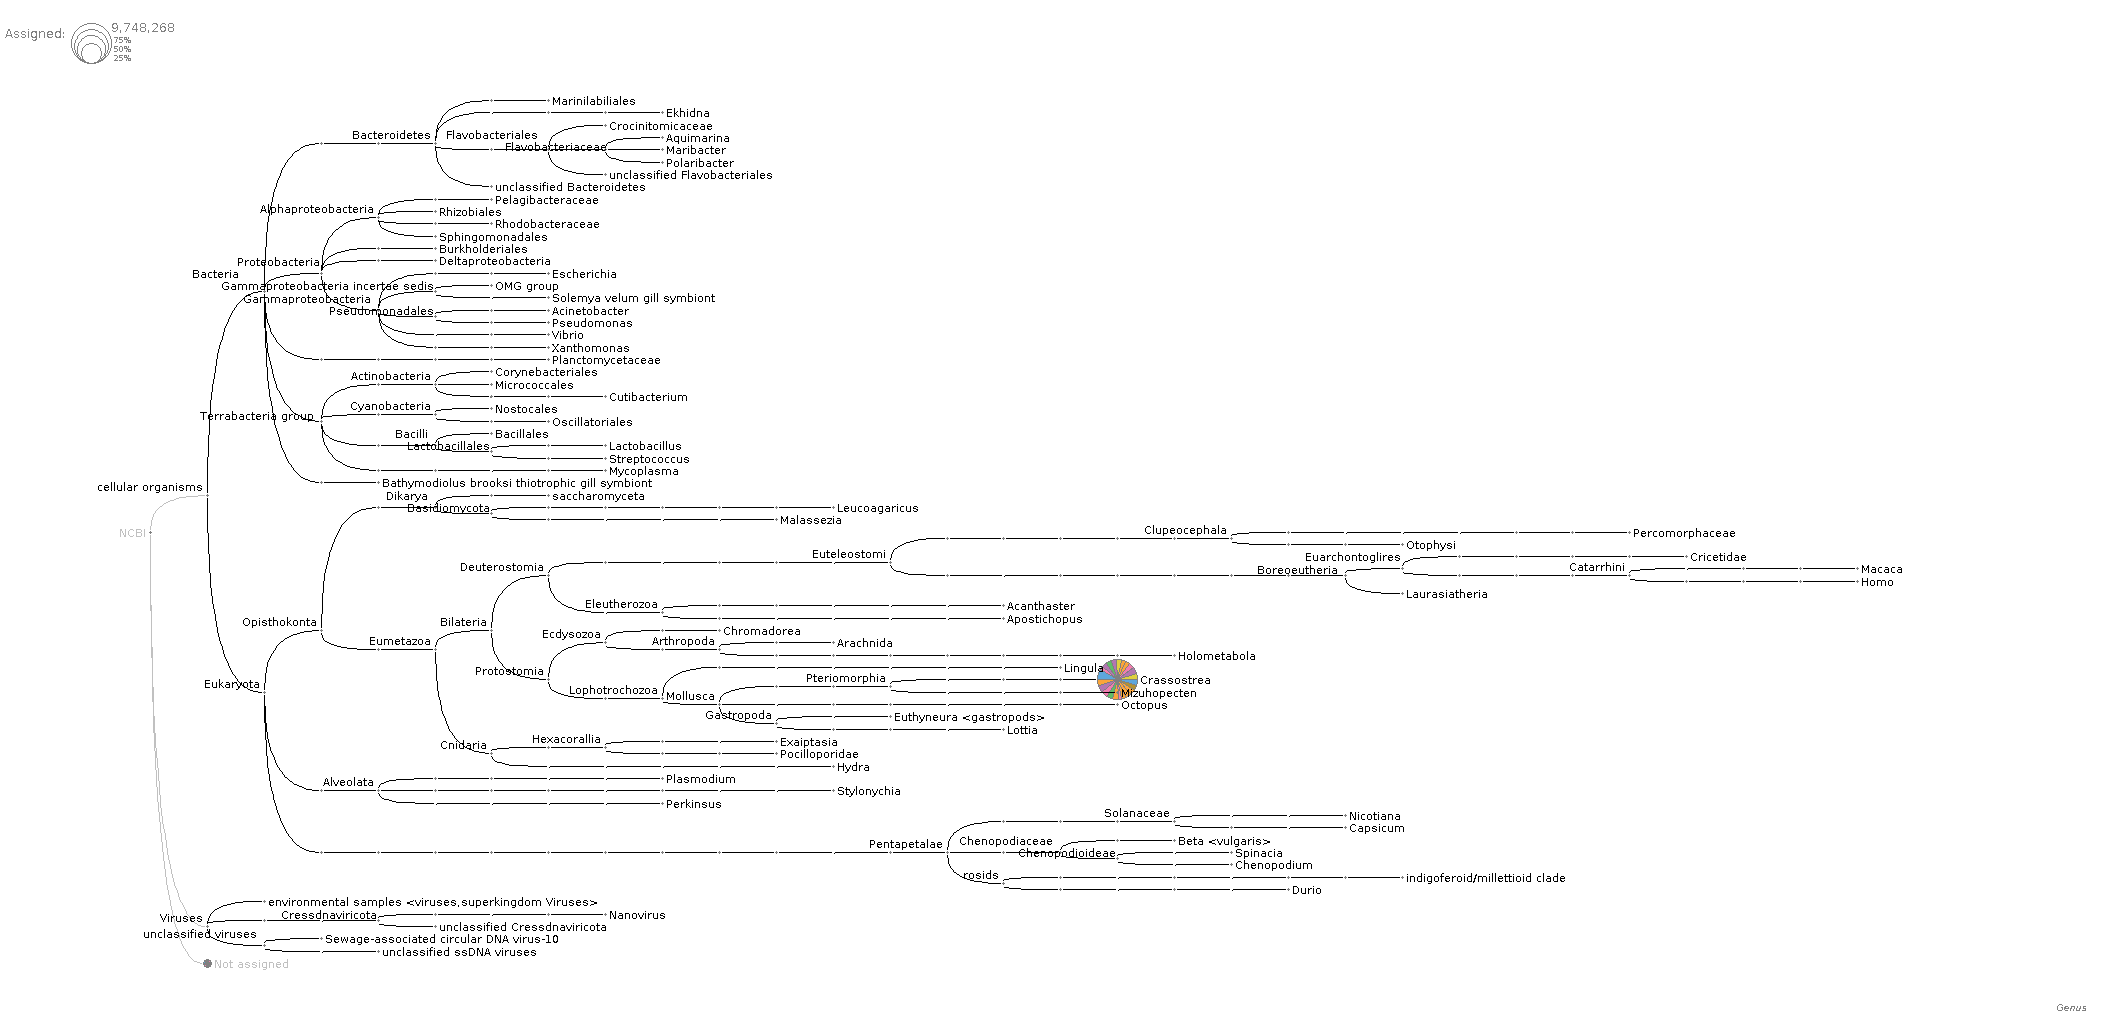 Phylogenetic tree of unmapped BSseq reads generated by MEGN6 software showing that most reads in all samples examined are assigned to the Genus "Crassostrea"